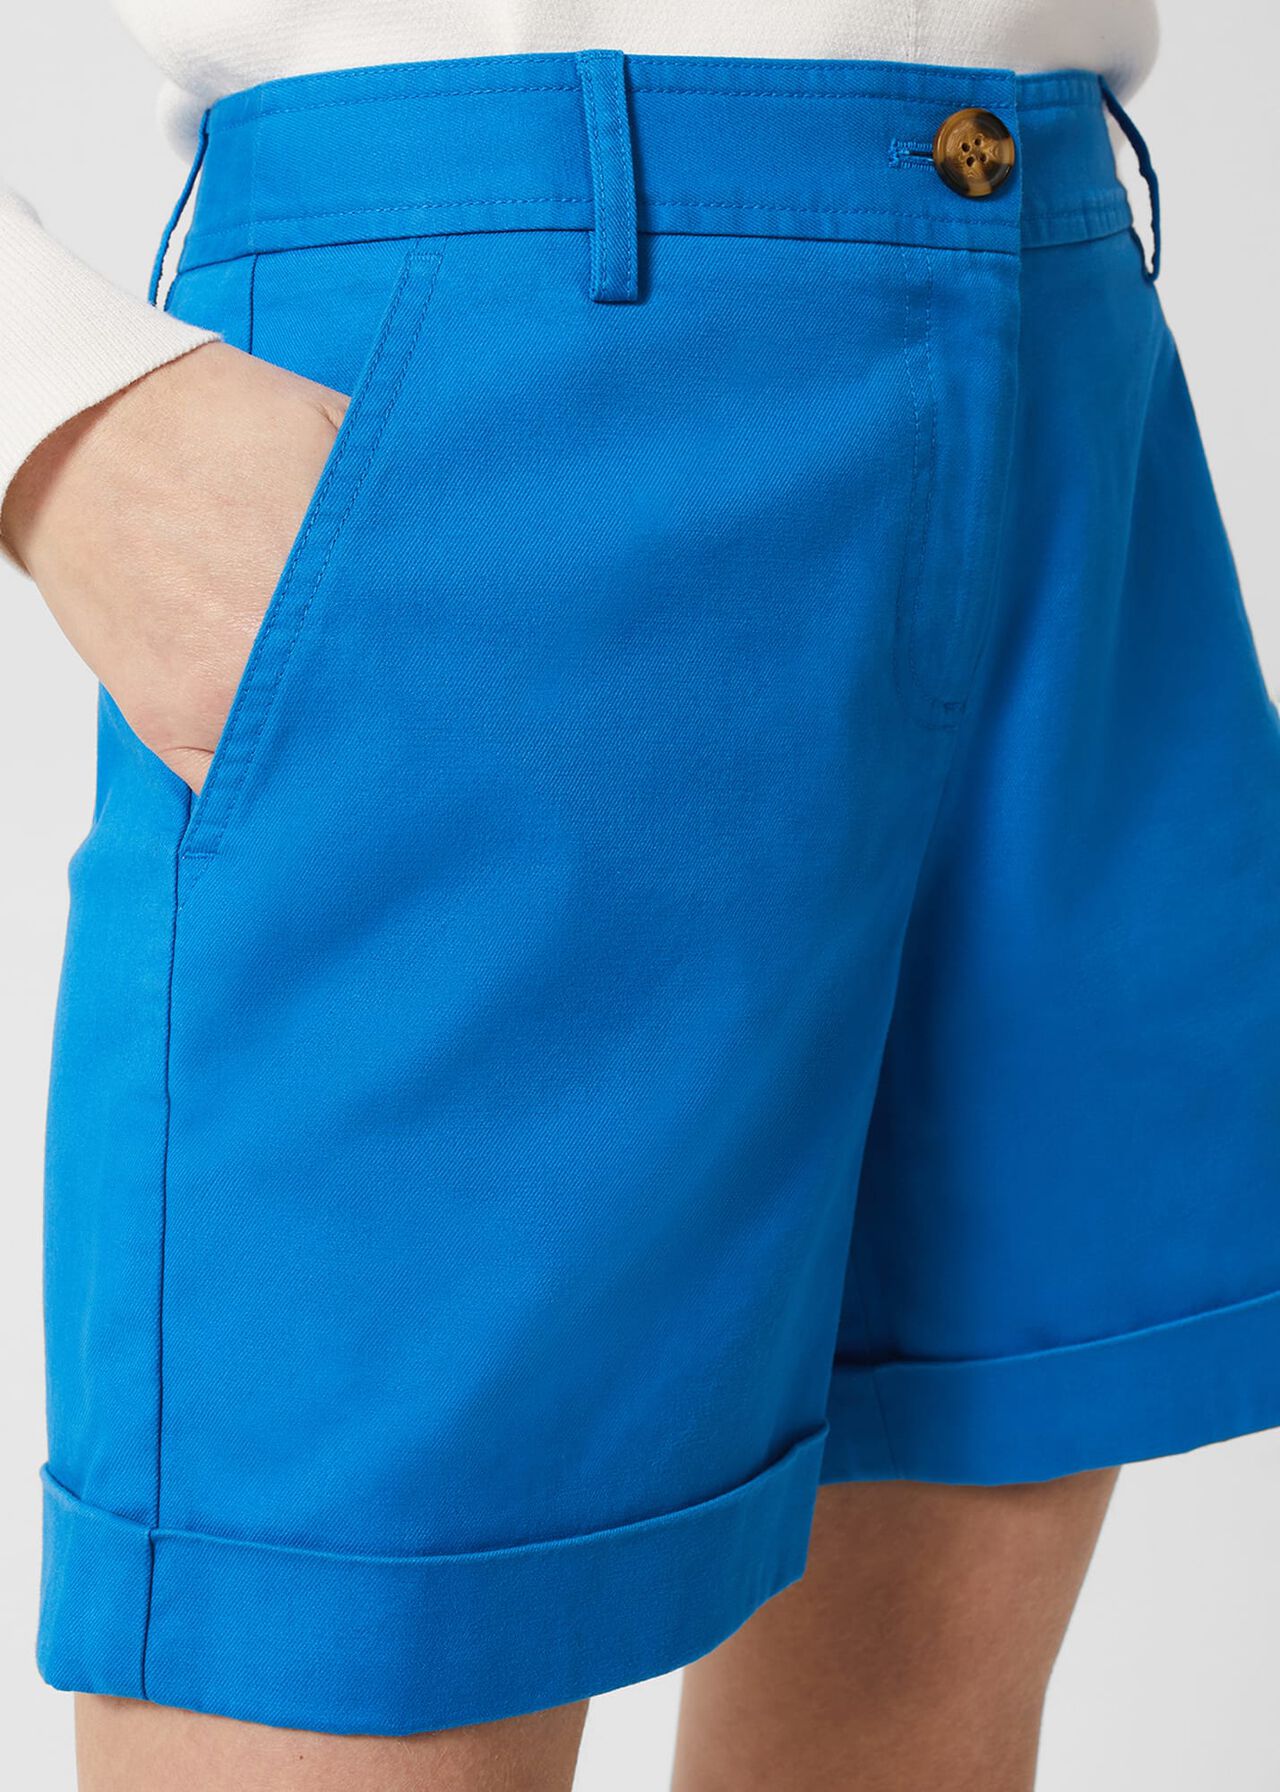 Chessie Shorts, Imperial Blue, hi-res